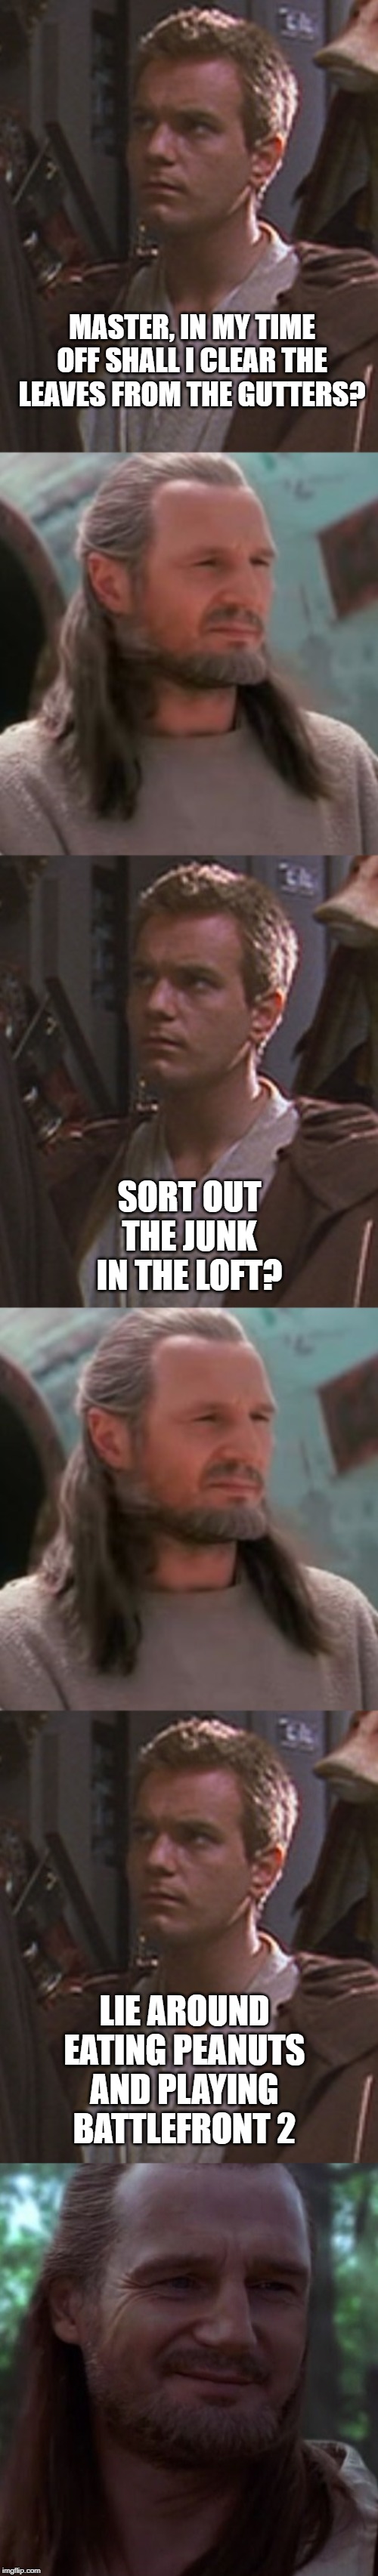 MASTER, IN MY TIME OFF SHALL I CLEAR THE LEAVES FROM THE GUTTERS? SORT OUT THE JUNK IN THE LOFT? LIE AROUND EATING PEANUTS AND PLAYING BATTLEFRONT 2 | made w/ Imgflip meme maker